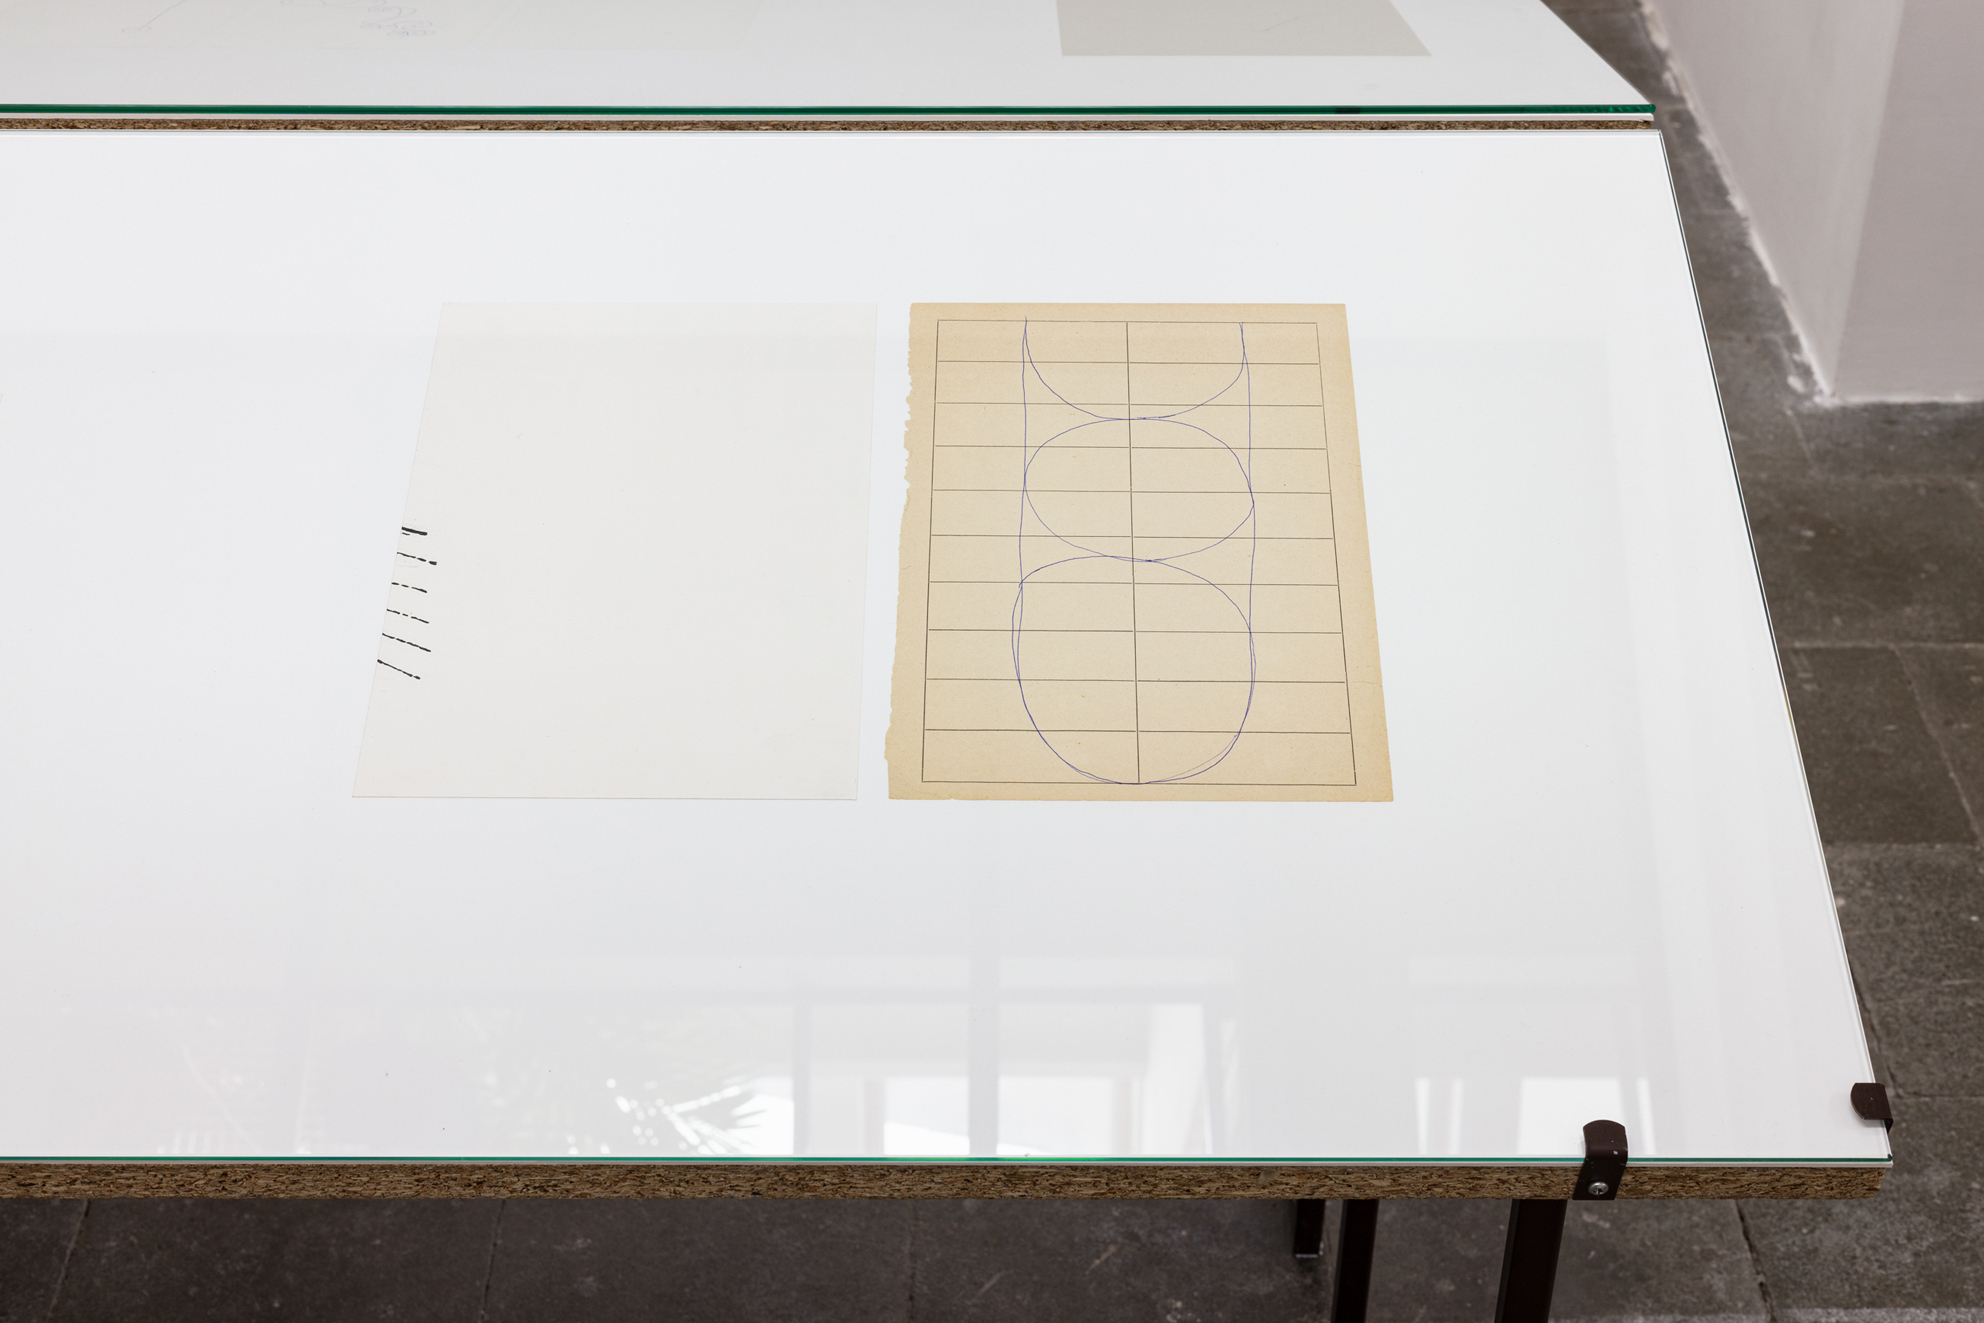 8. Maxime Le Bon, On the Left: Piece, 2021, oil on paper, 21 x 29,7 cm 2021 On the right: Column, 2022, inkjet print and ballpoint pen on paper, 21 x 29,7 cm